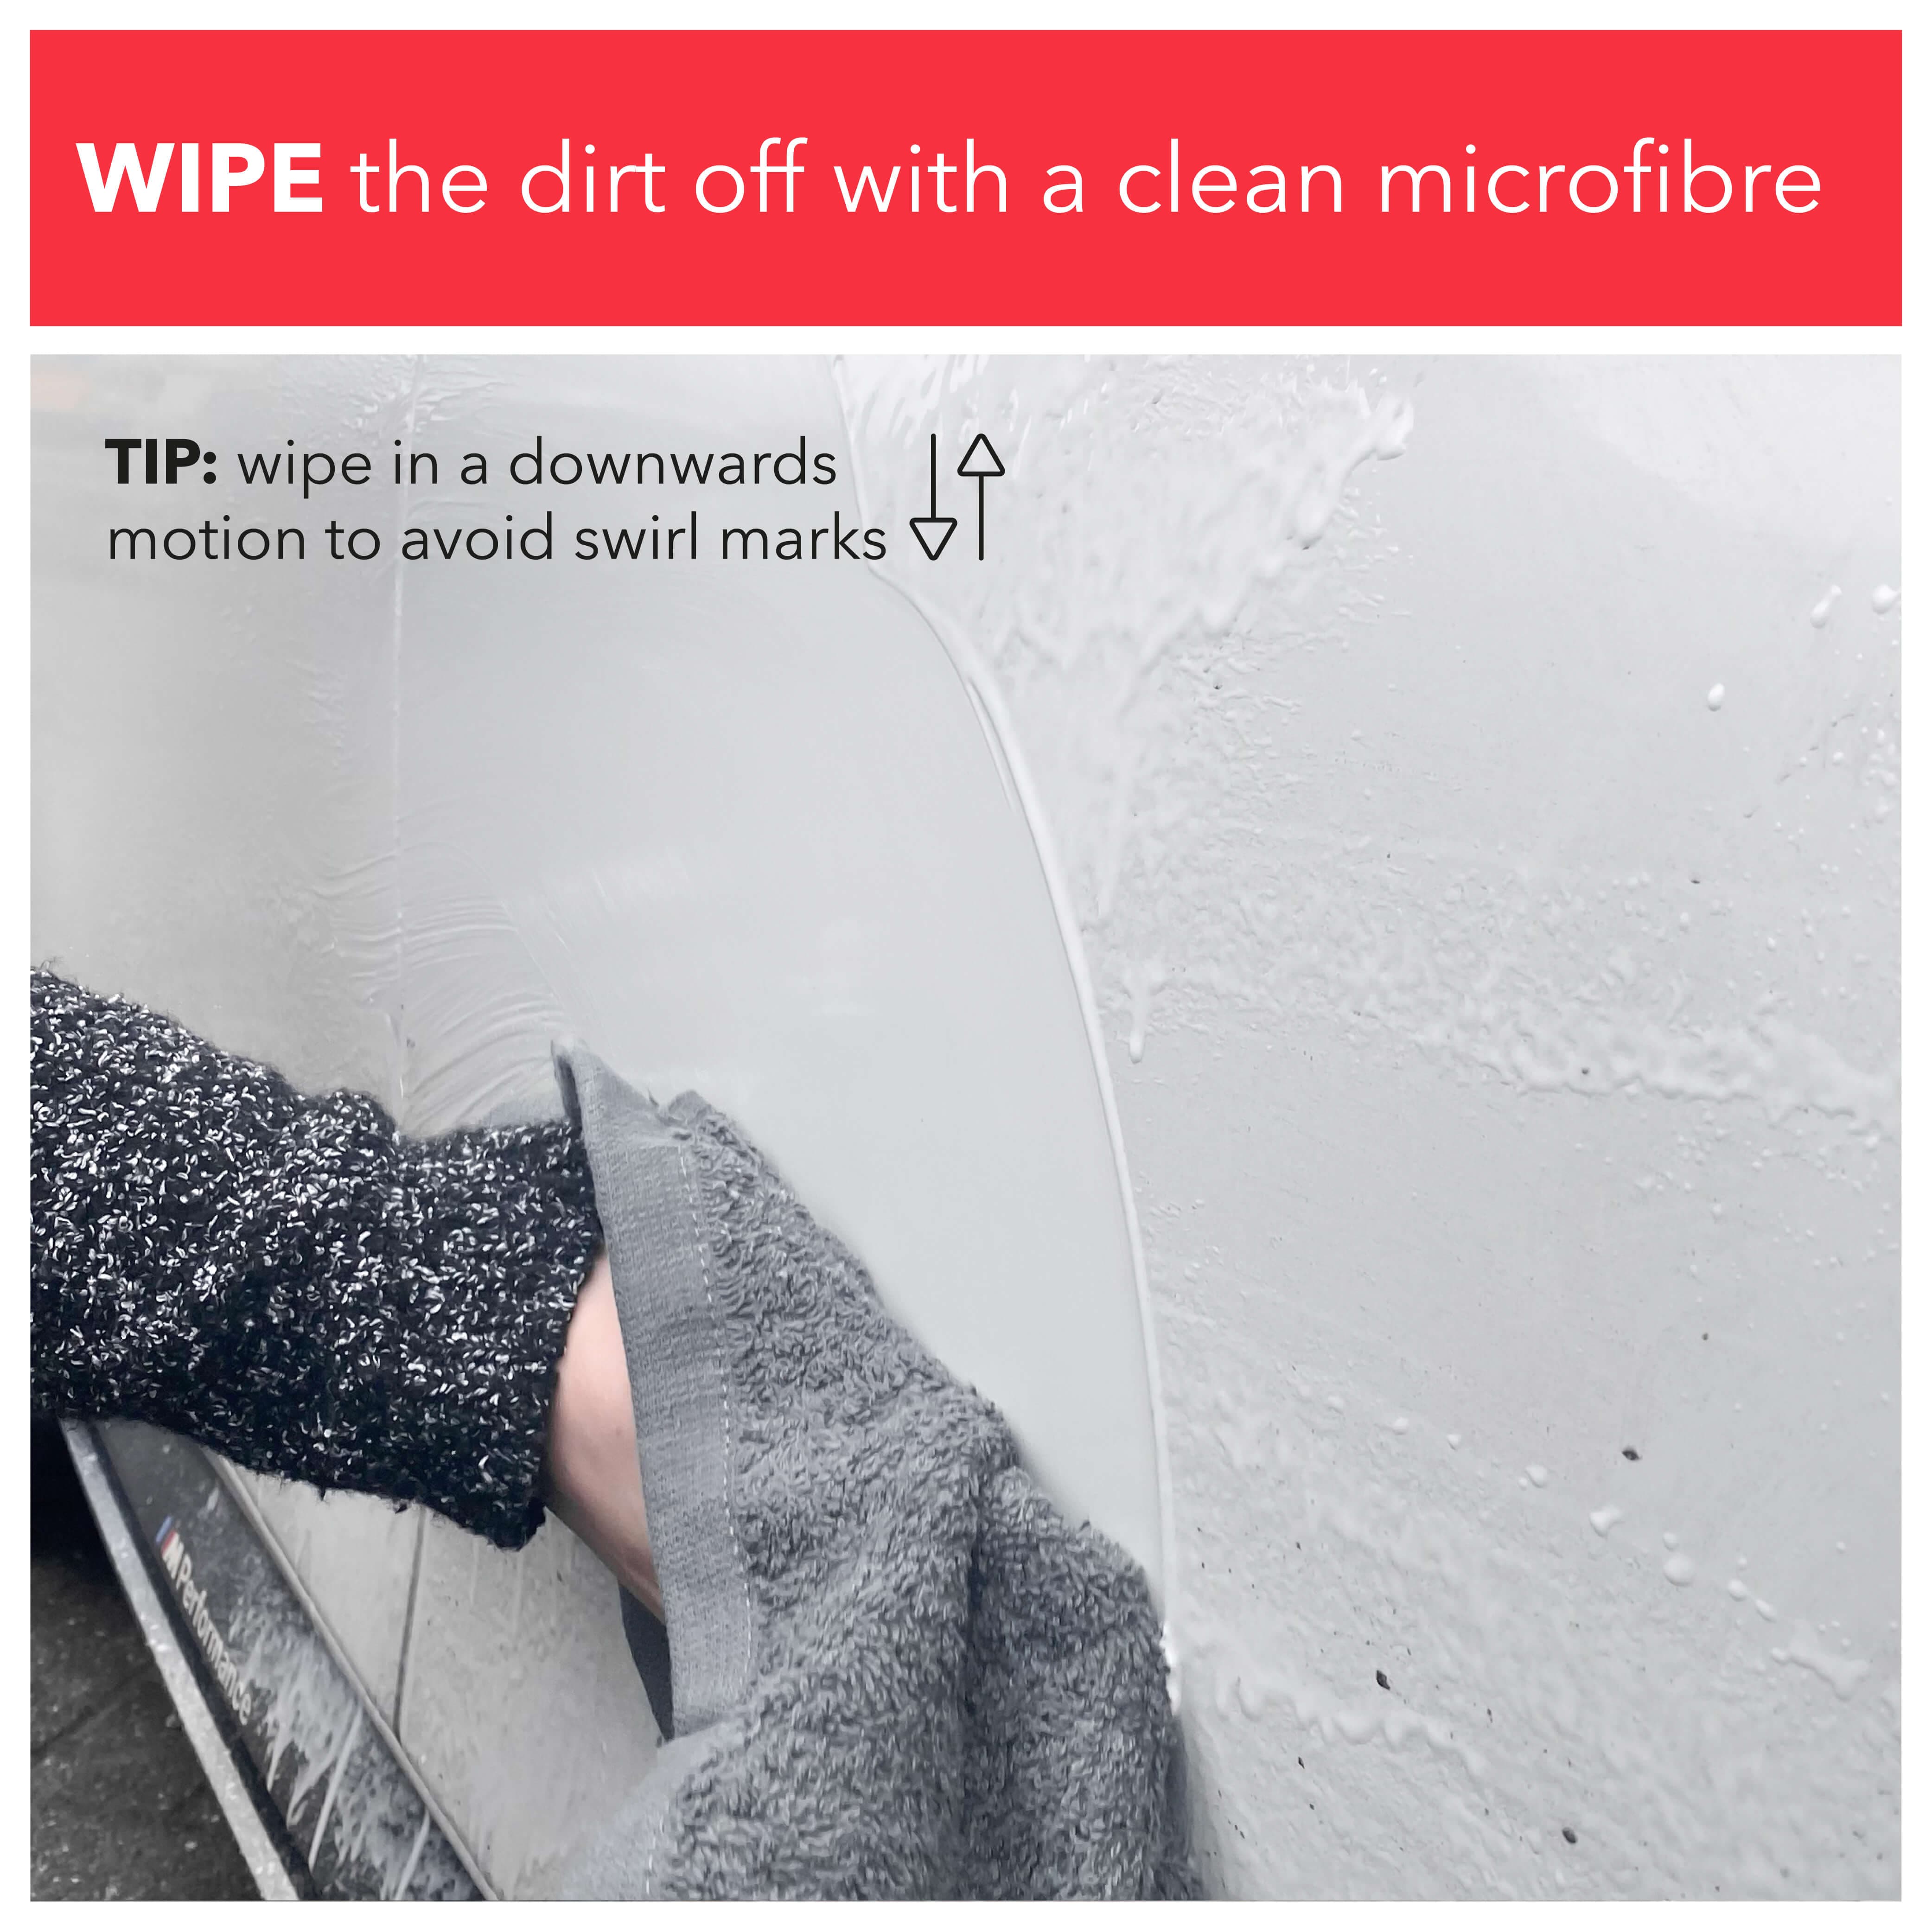 Wipe the dirt off with a clean microfibre cloth